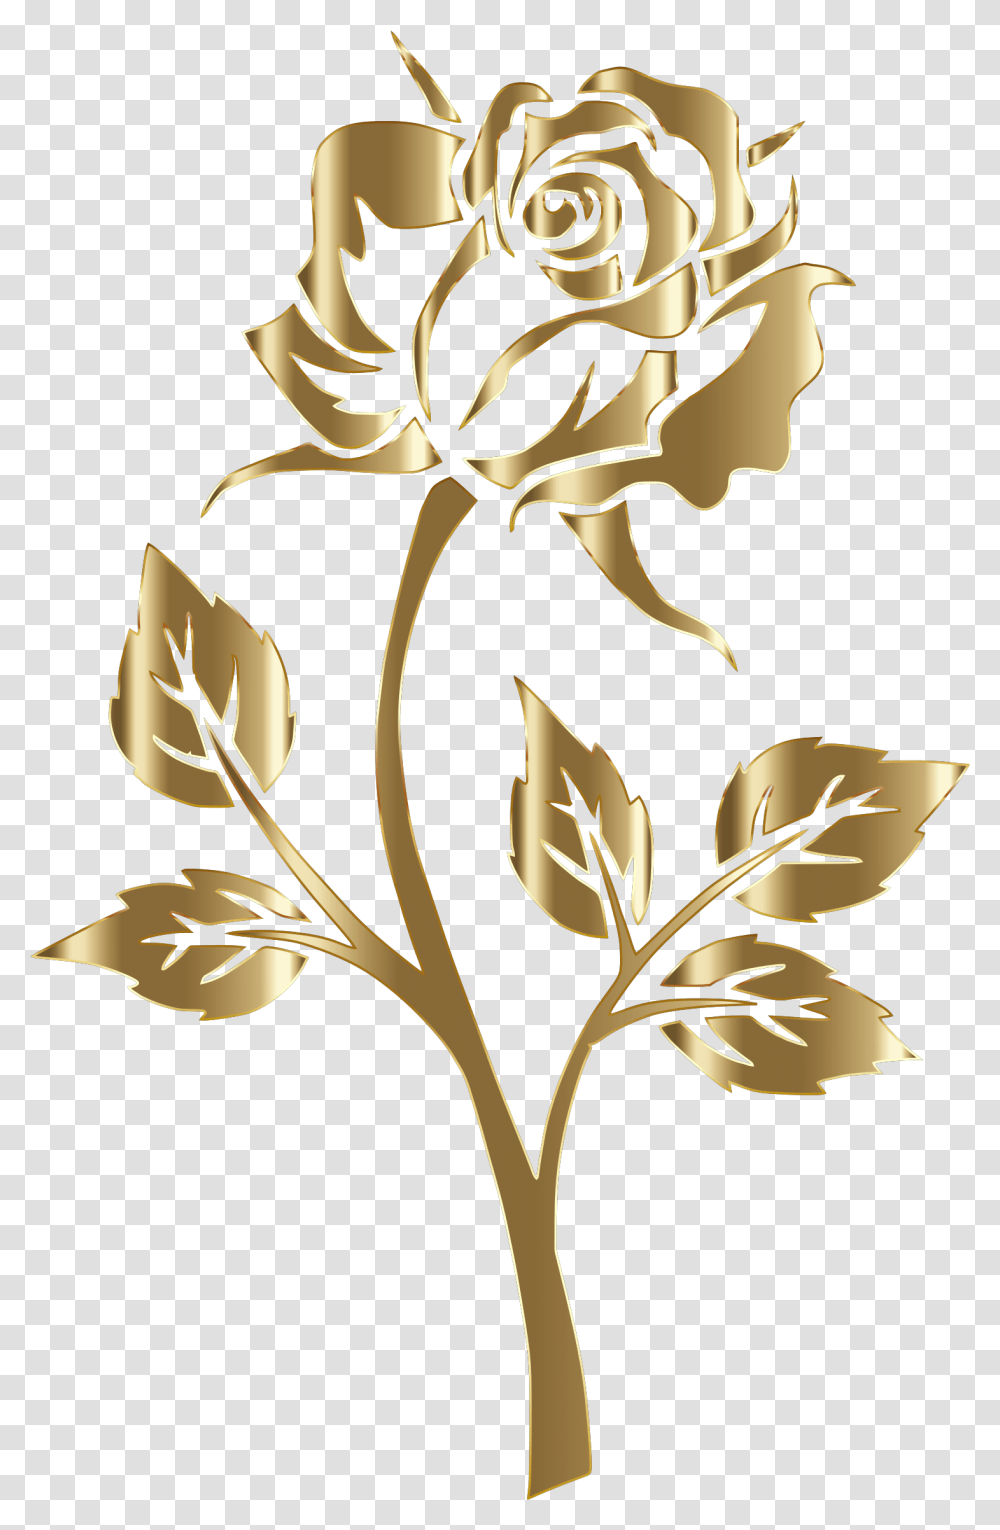 Copper Rose Silhouette No Background Clip Arts Red Rose Beauty And The Beast, Floral Design, Pattern, Plant Transparent Png